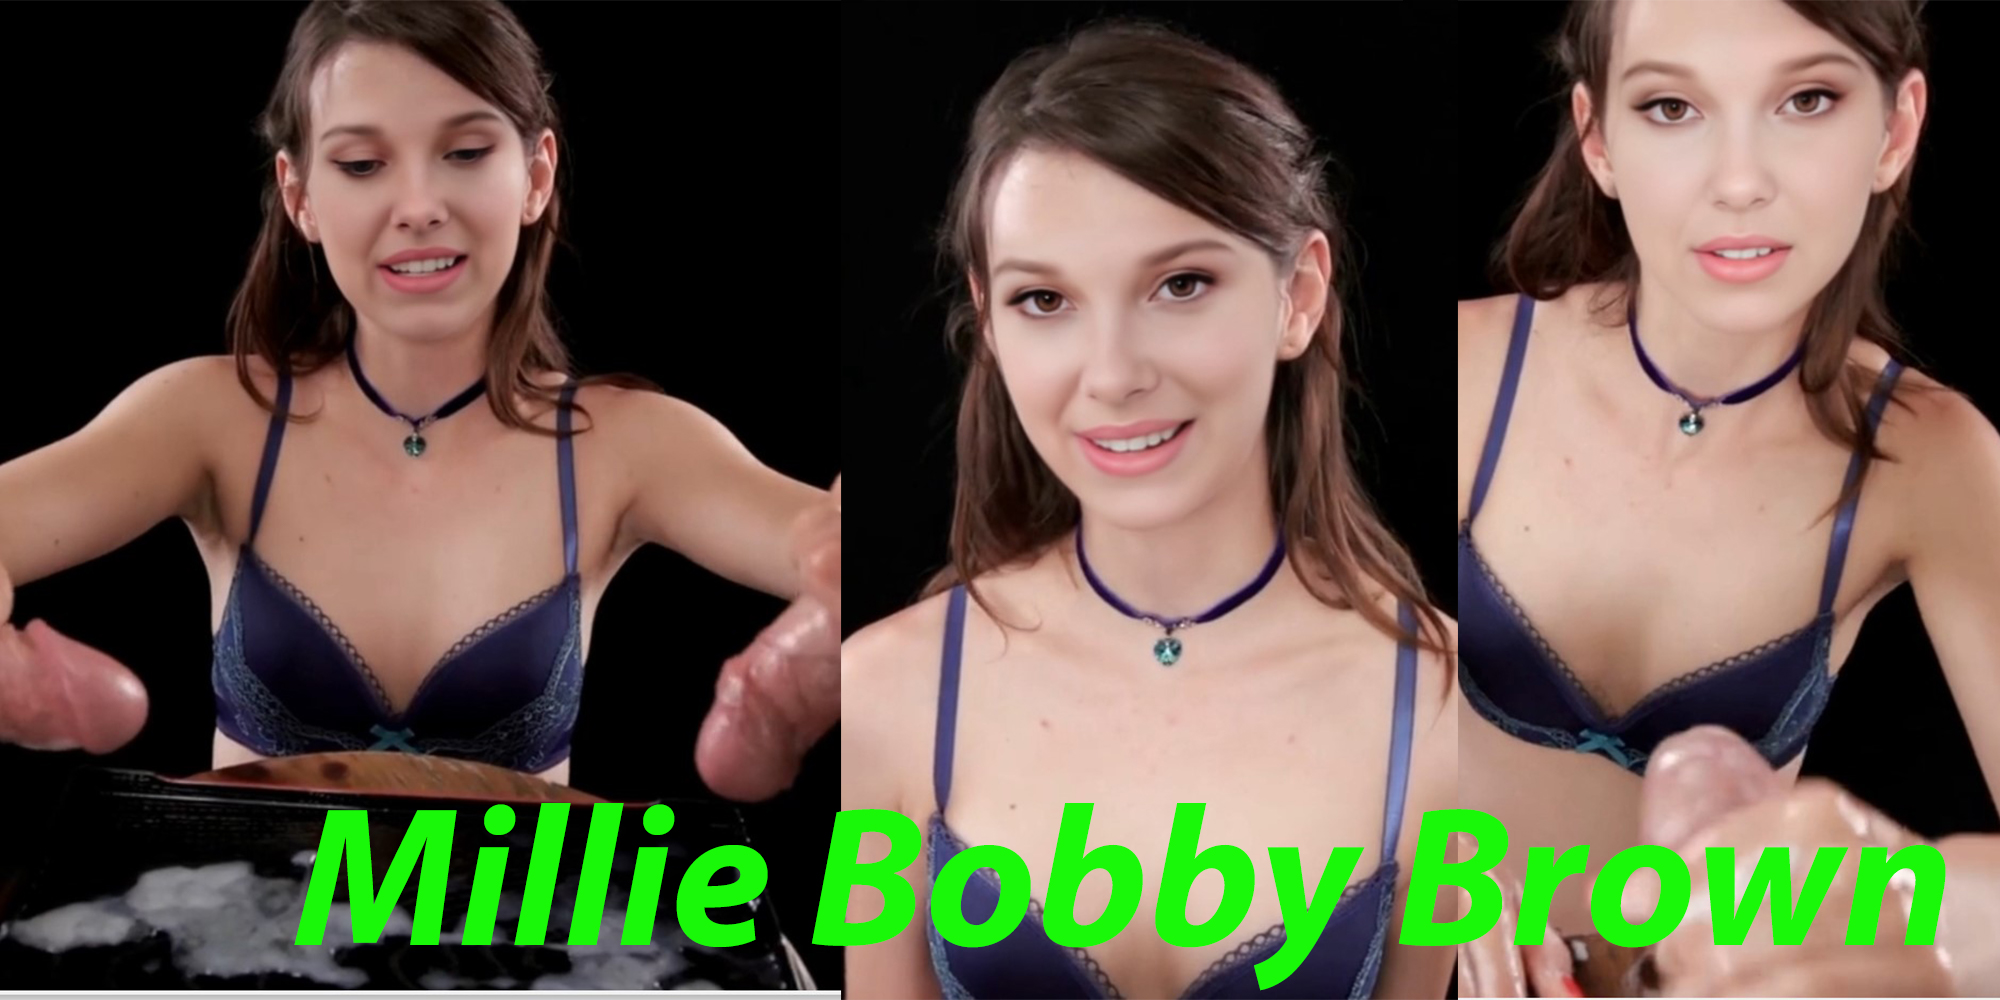 Millie Bobby Brown collects sperm (full version)